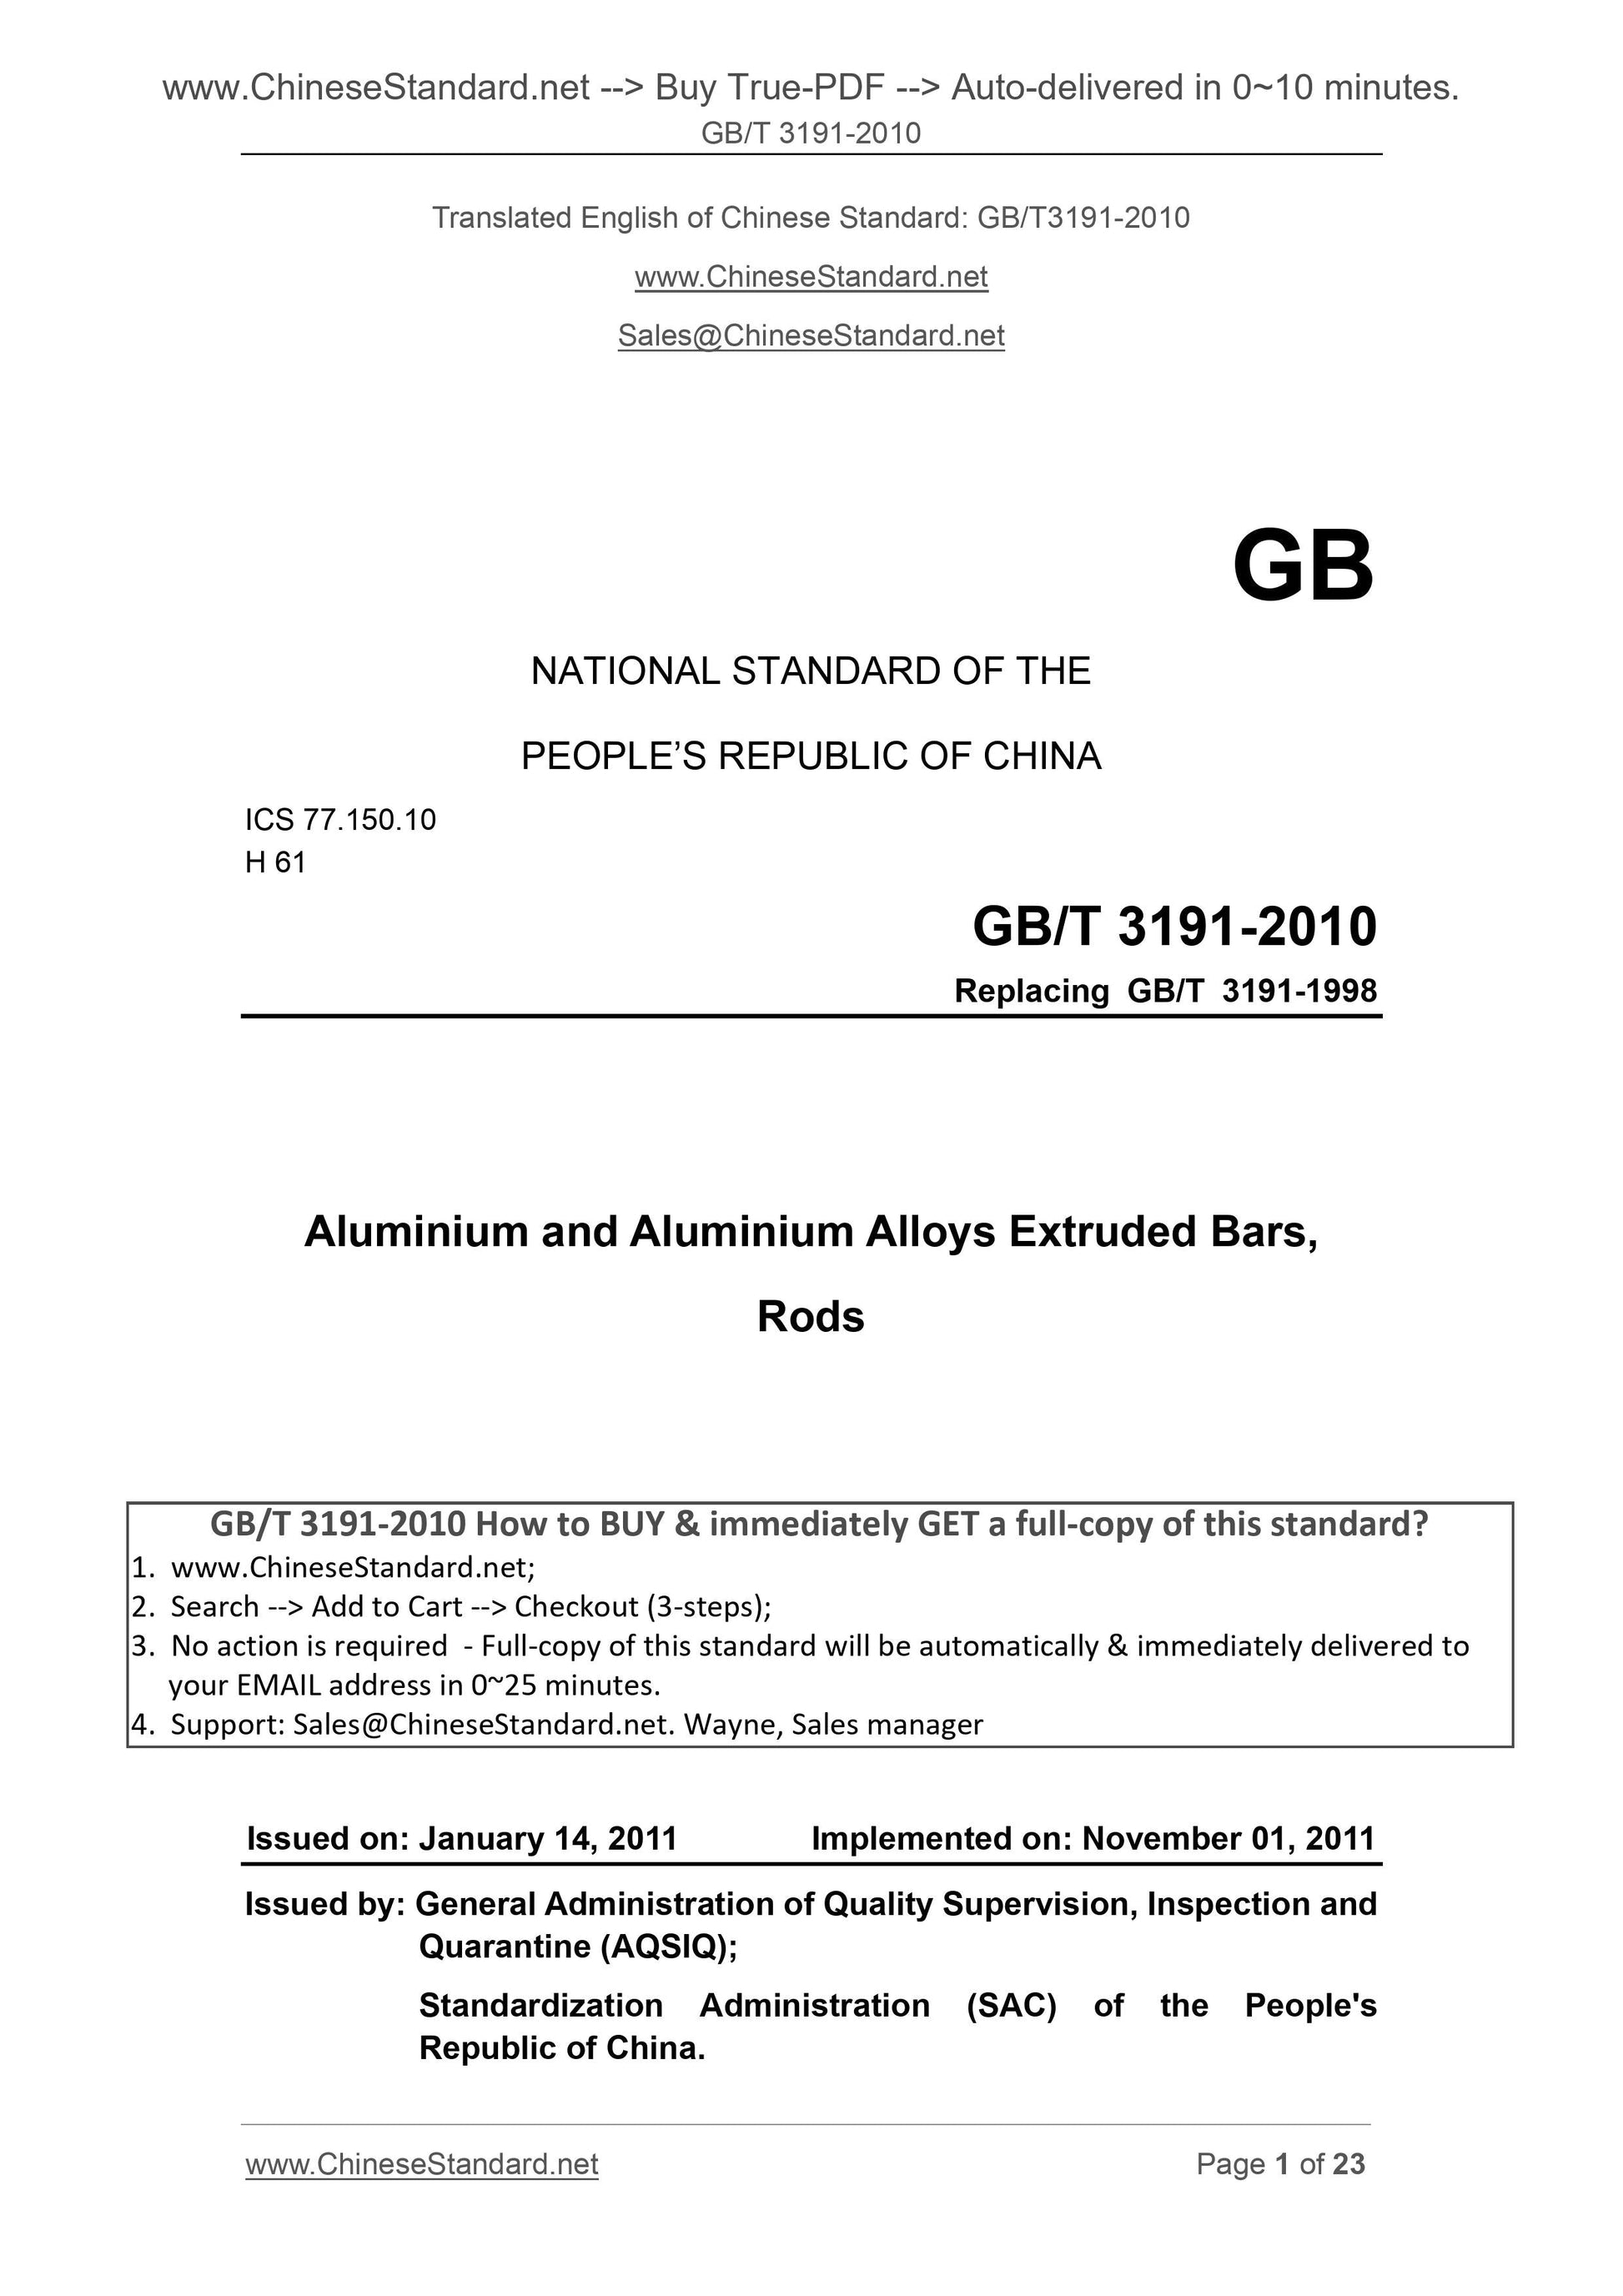 GB/T 3191-2010 Page 1